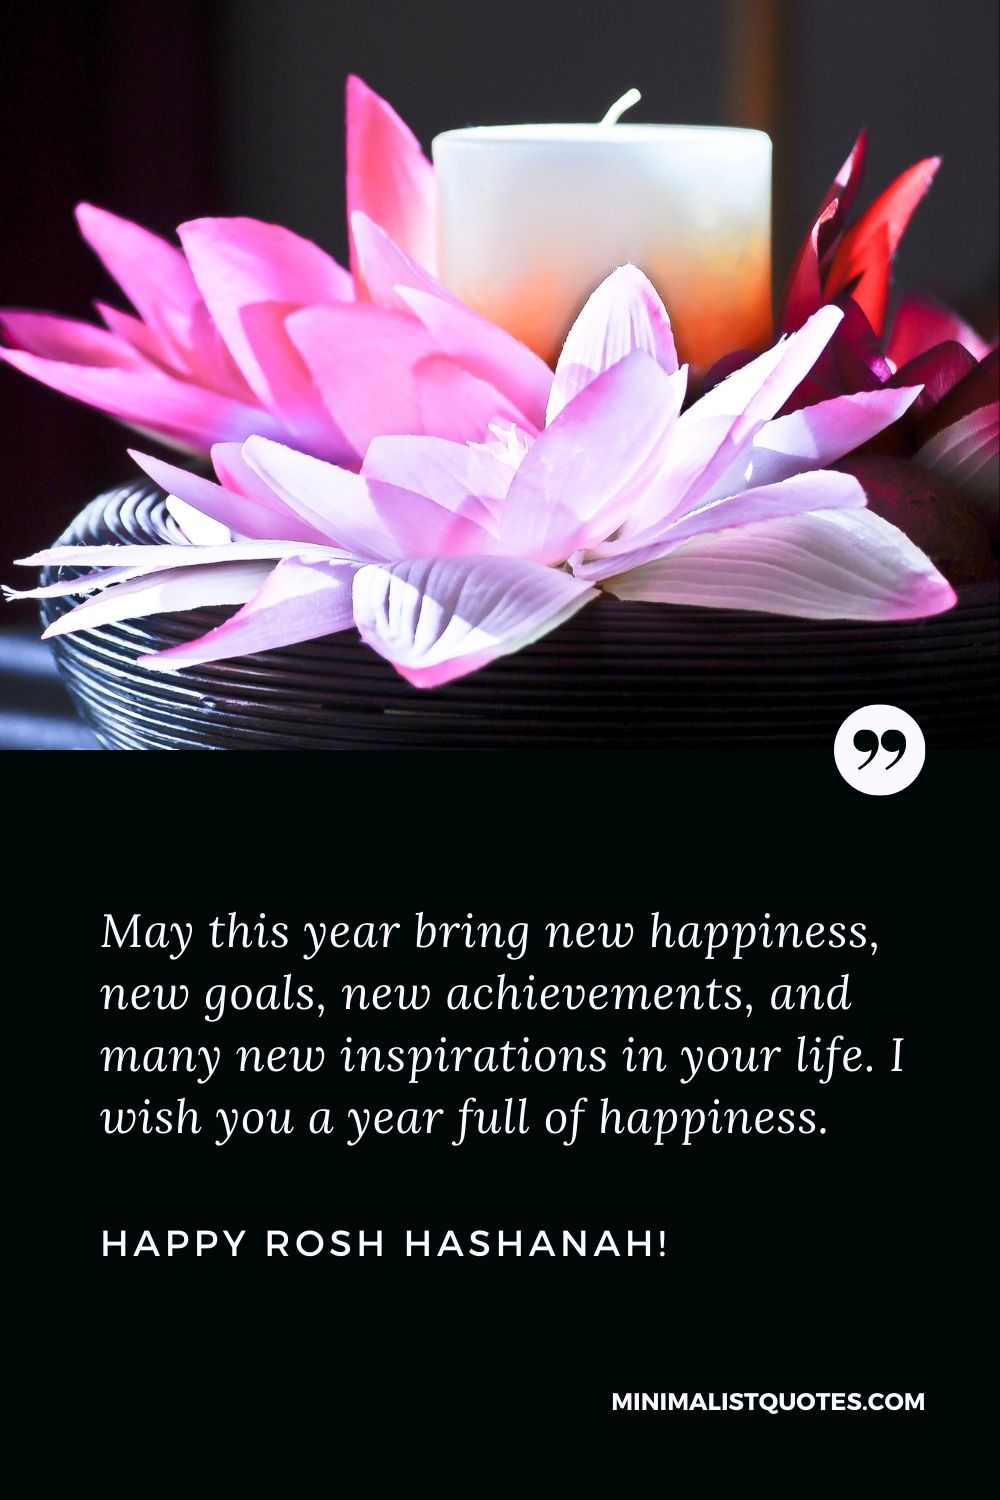 May This Year Bring New Happiness New Goals New Achievements And Many New Inspirations In Your Life I Wish You A Year Full Of Happiness Happy Rosh Hashanah